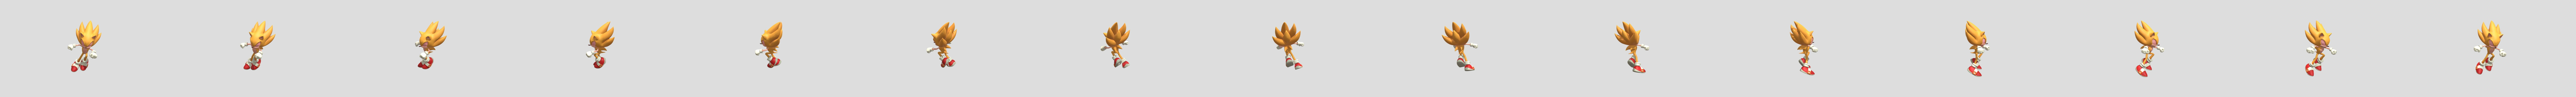 Super sonic.EXE - Download Free 3D model by MJ lock [ad447a6] - Sketchfab